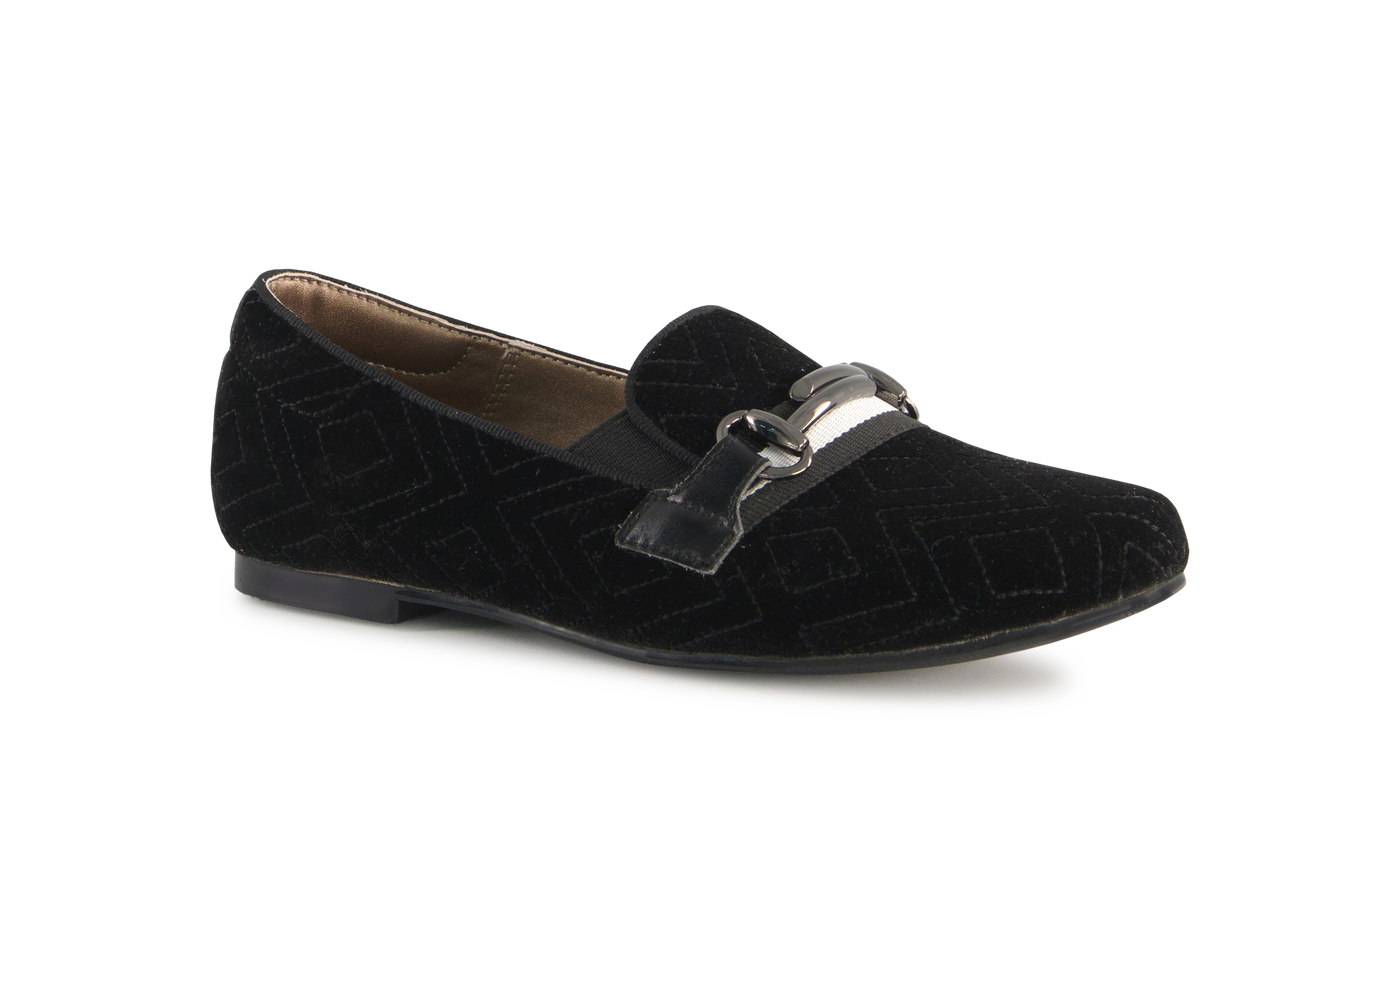 Ponpano Adrian Buckle B Classic Loafer Black